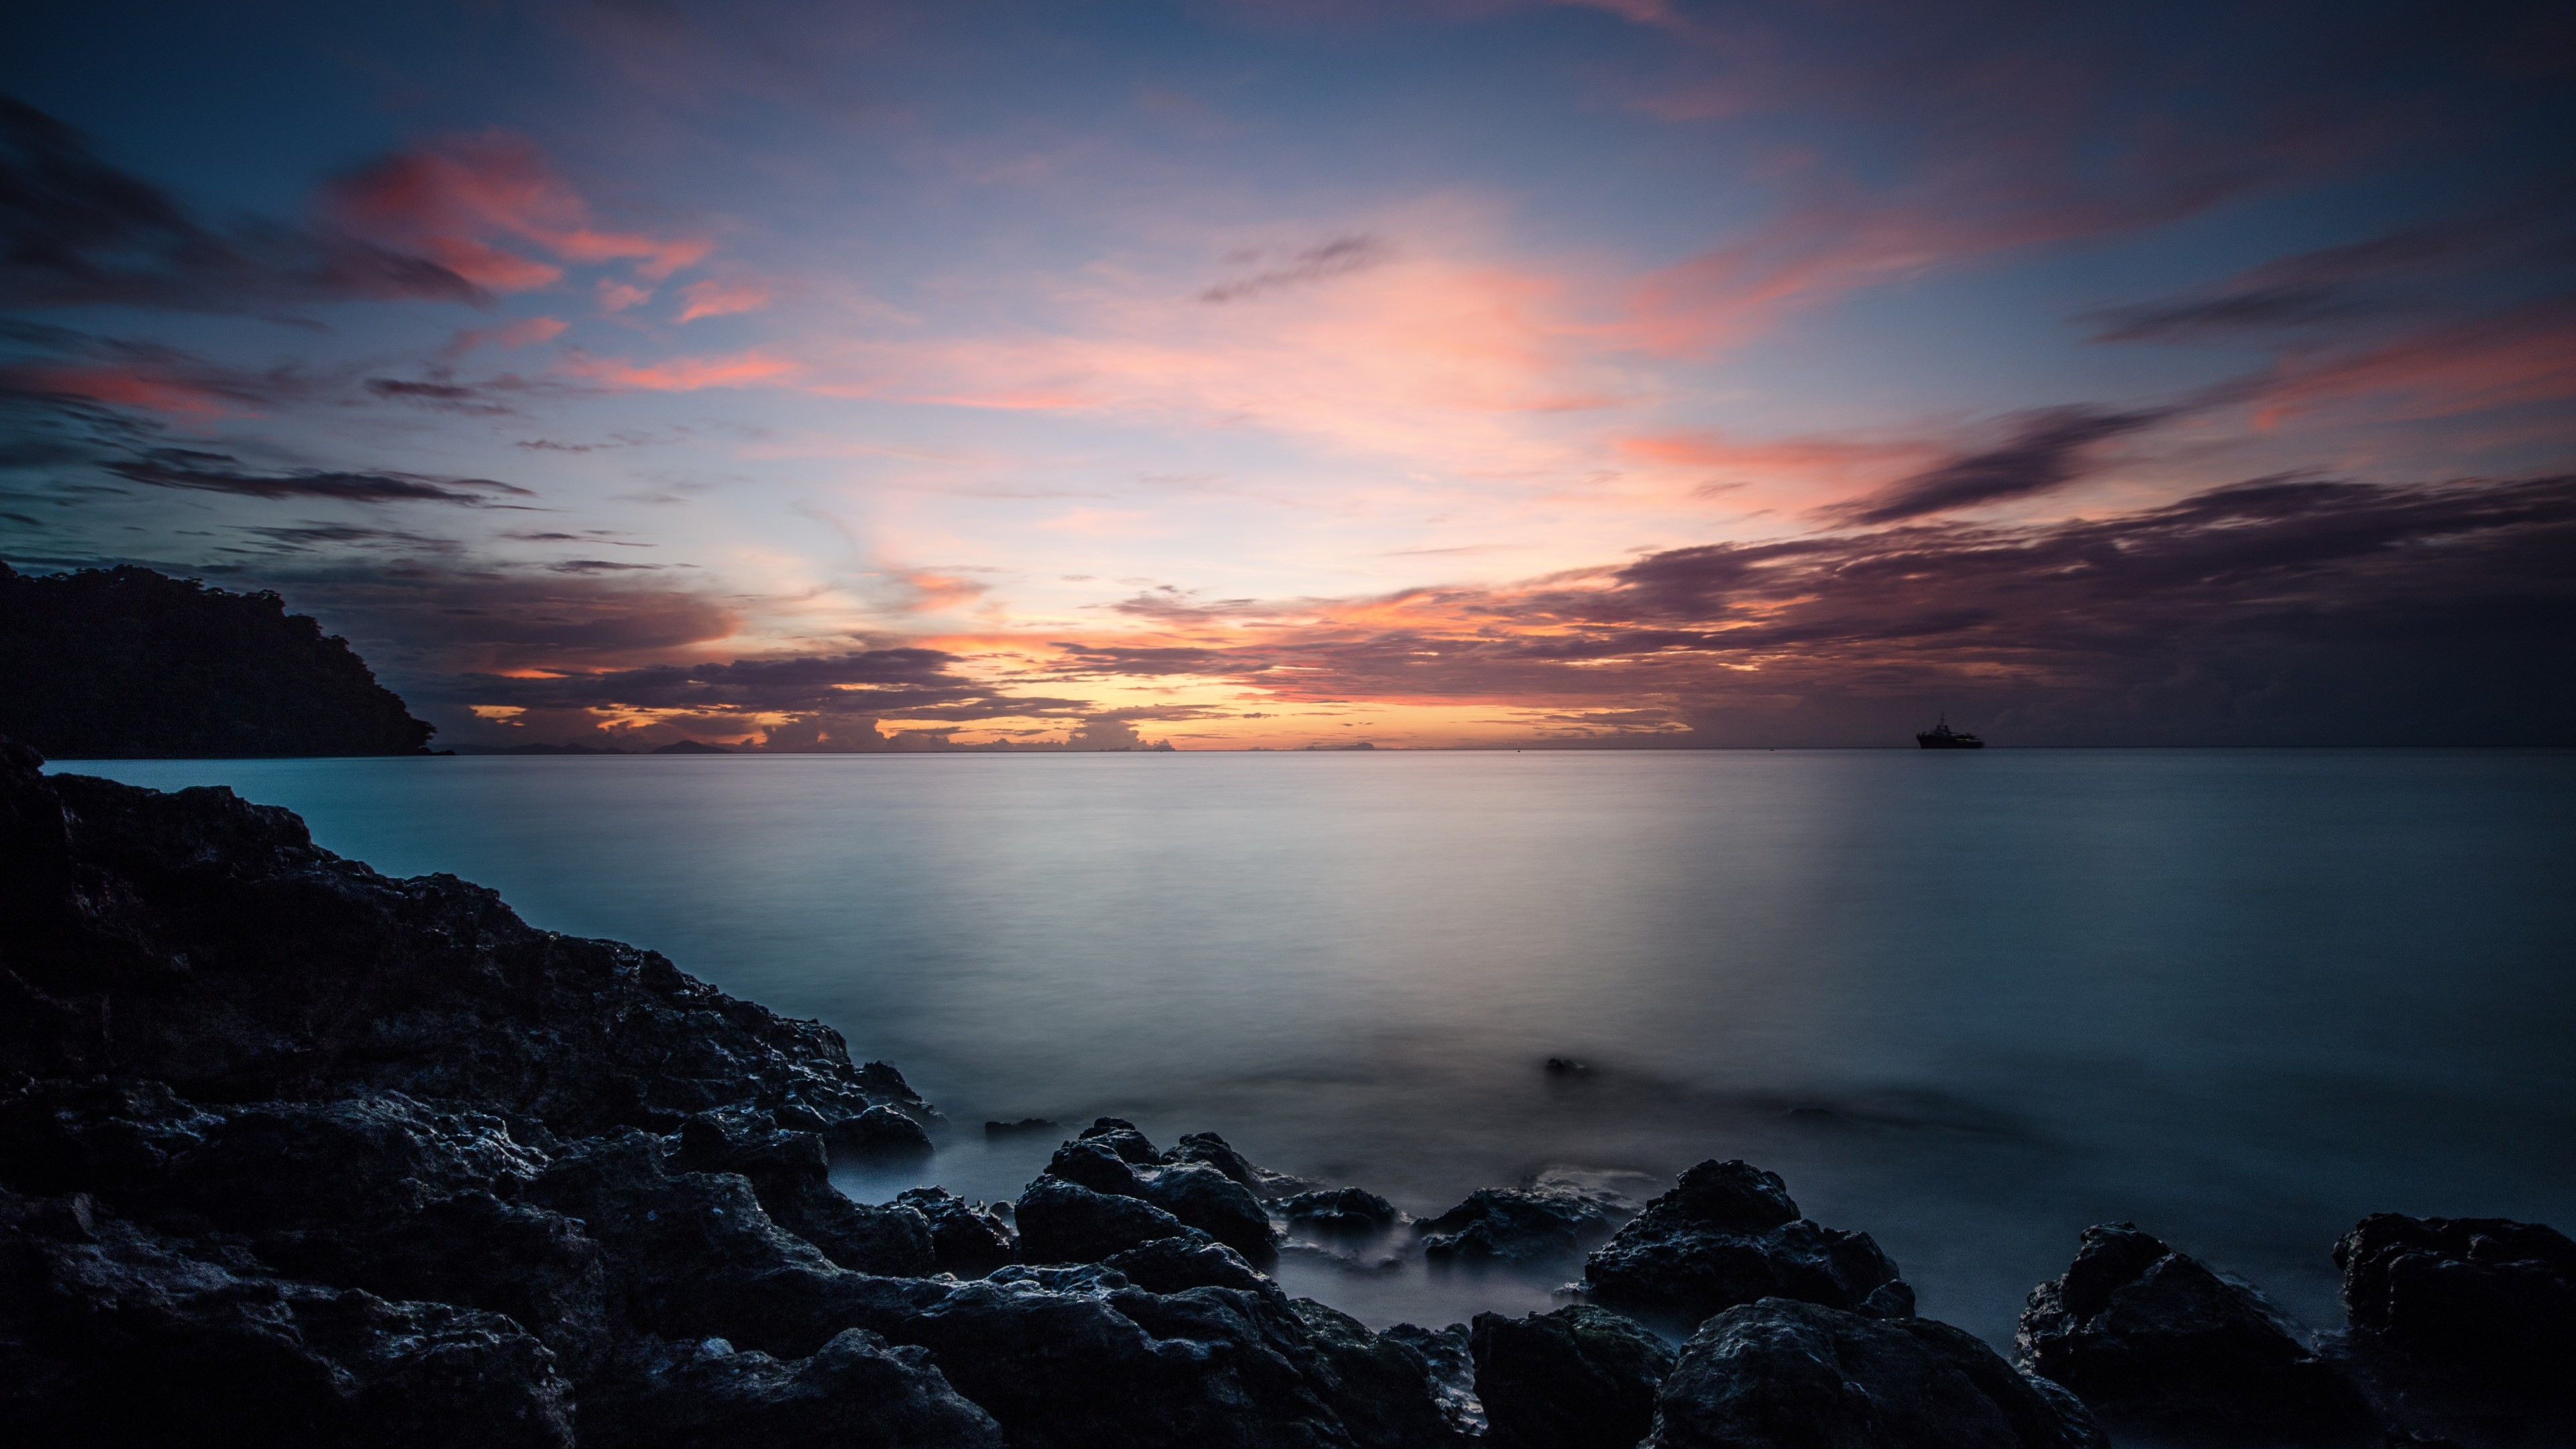 Sunset, rocks, clouds, view from Thailand wallpaper 3840x2160